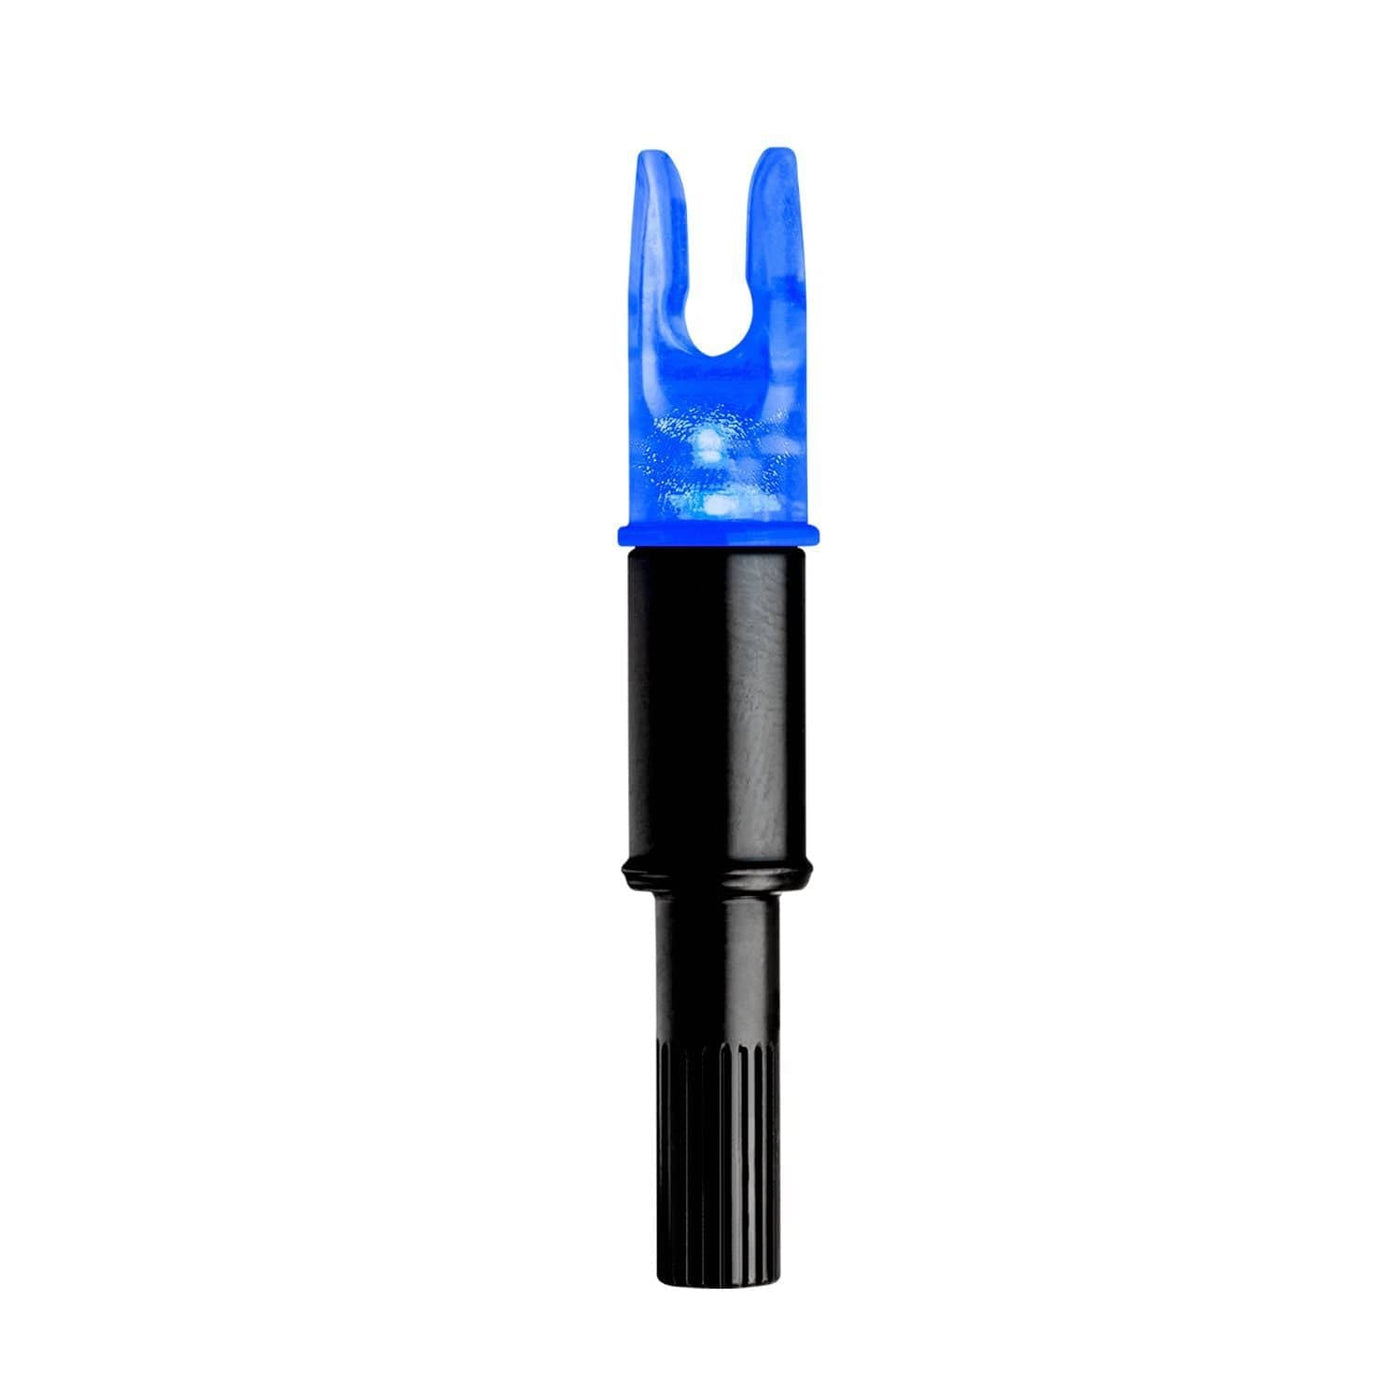 New Archery Products NAP Illuminated Nock Red 3-pack Blue Archery